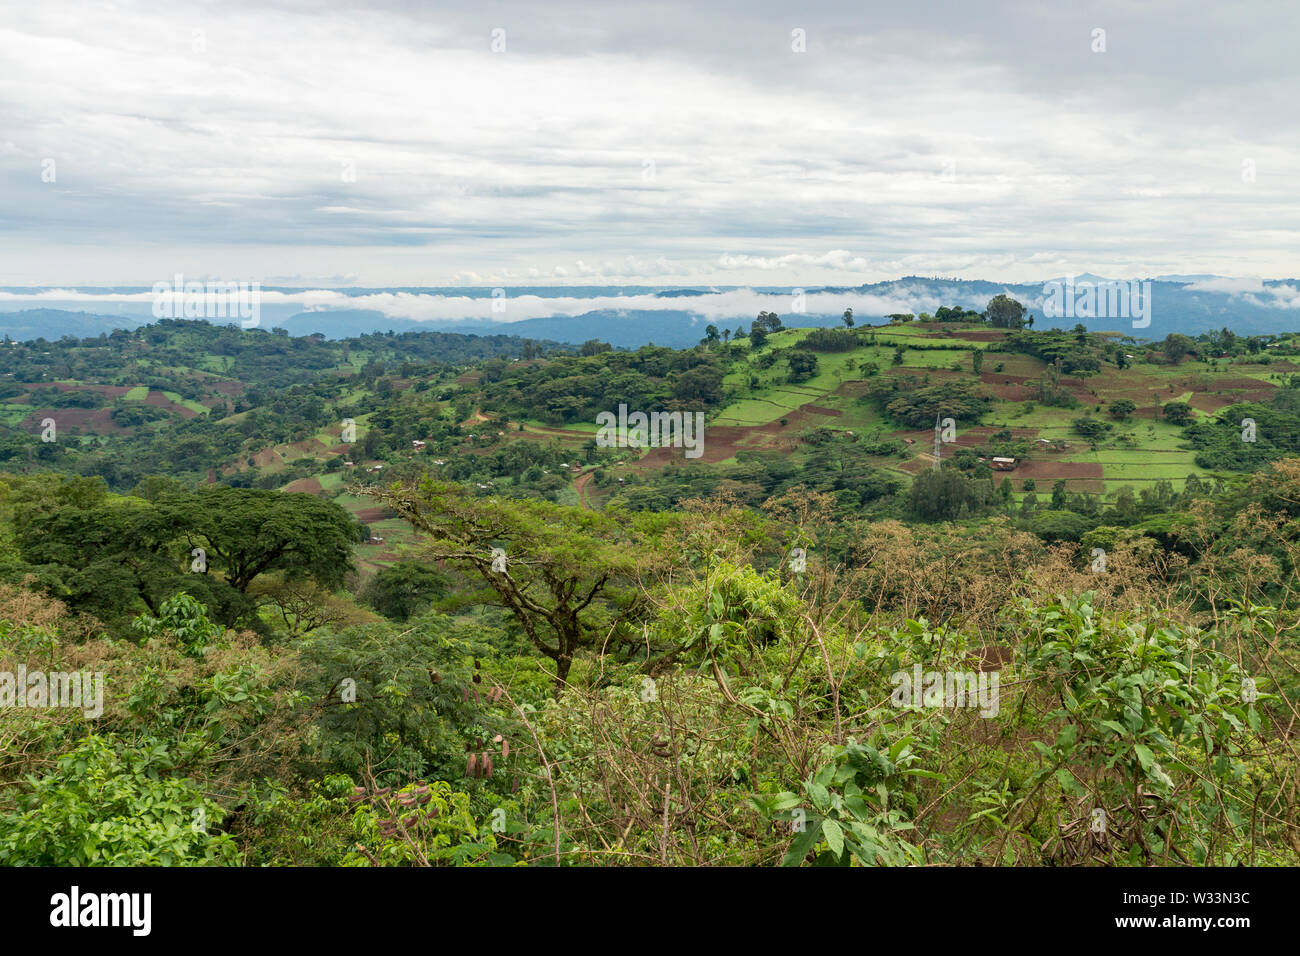 Green farming and forested landscape in Illubabor, western Ethiopia. Stock Photo